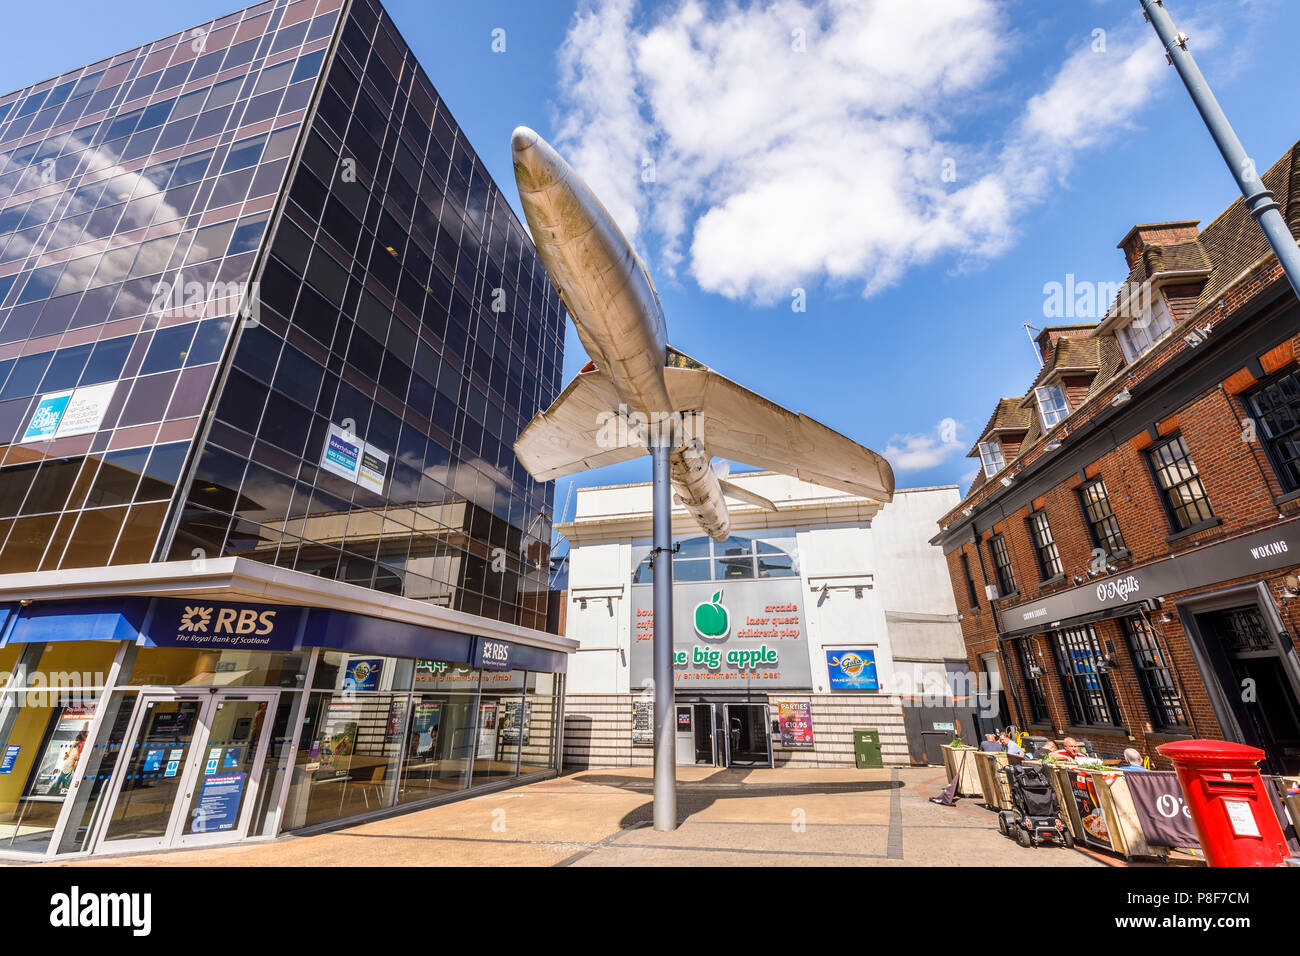 Hawker Hunter aircraft mounted on a pole outside the Big Apple entertainment centre in Crown Square, Woking town centre, Surrey, UK Stock Photo